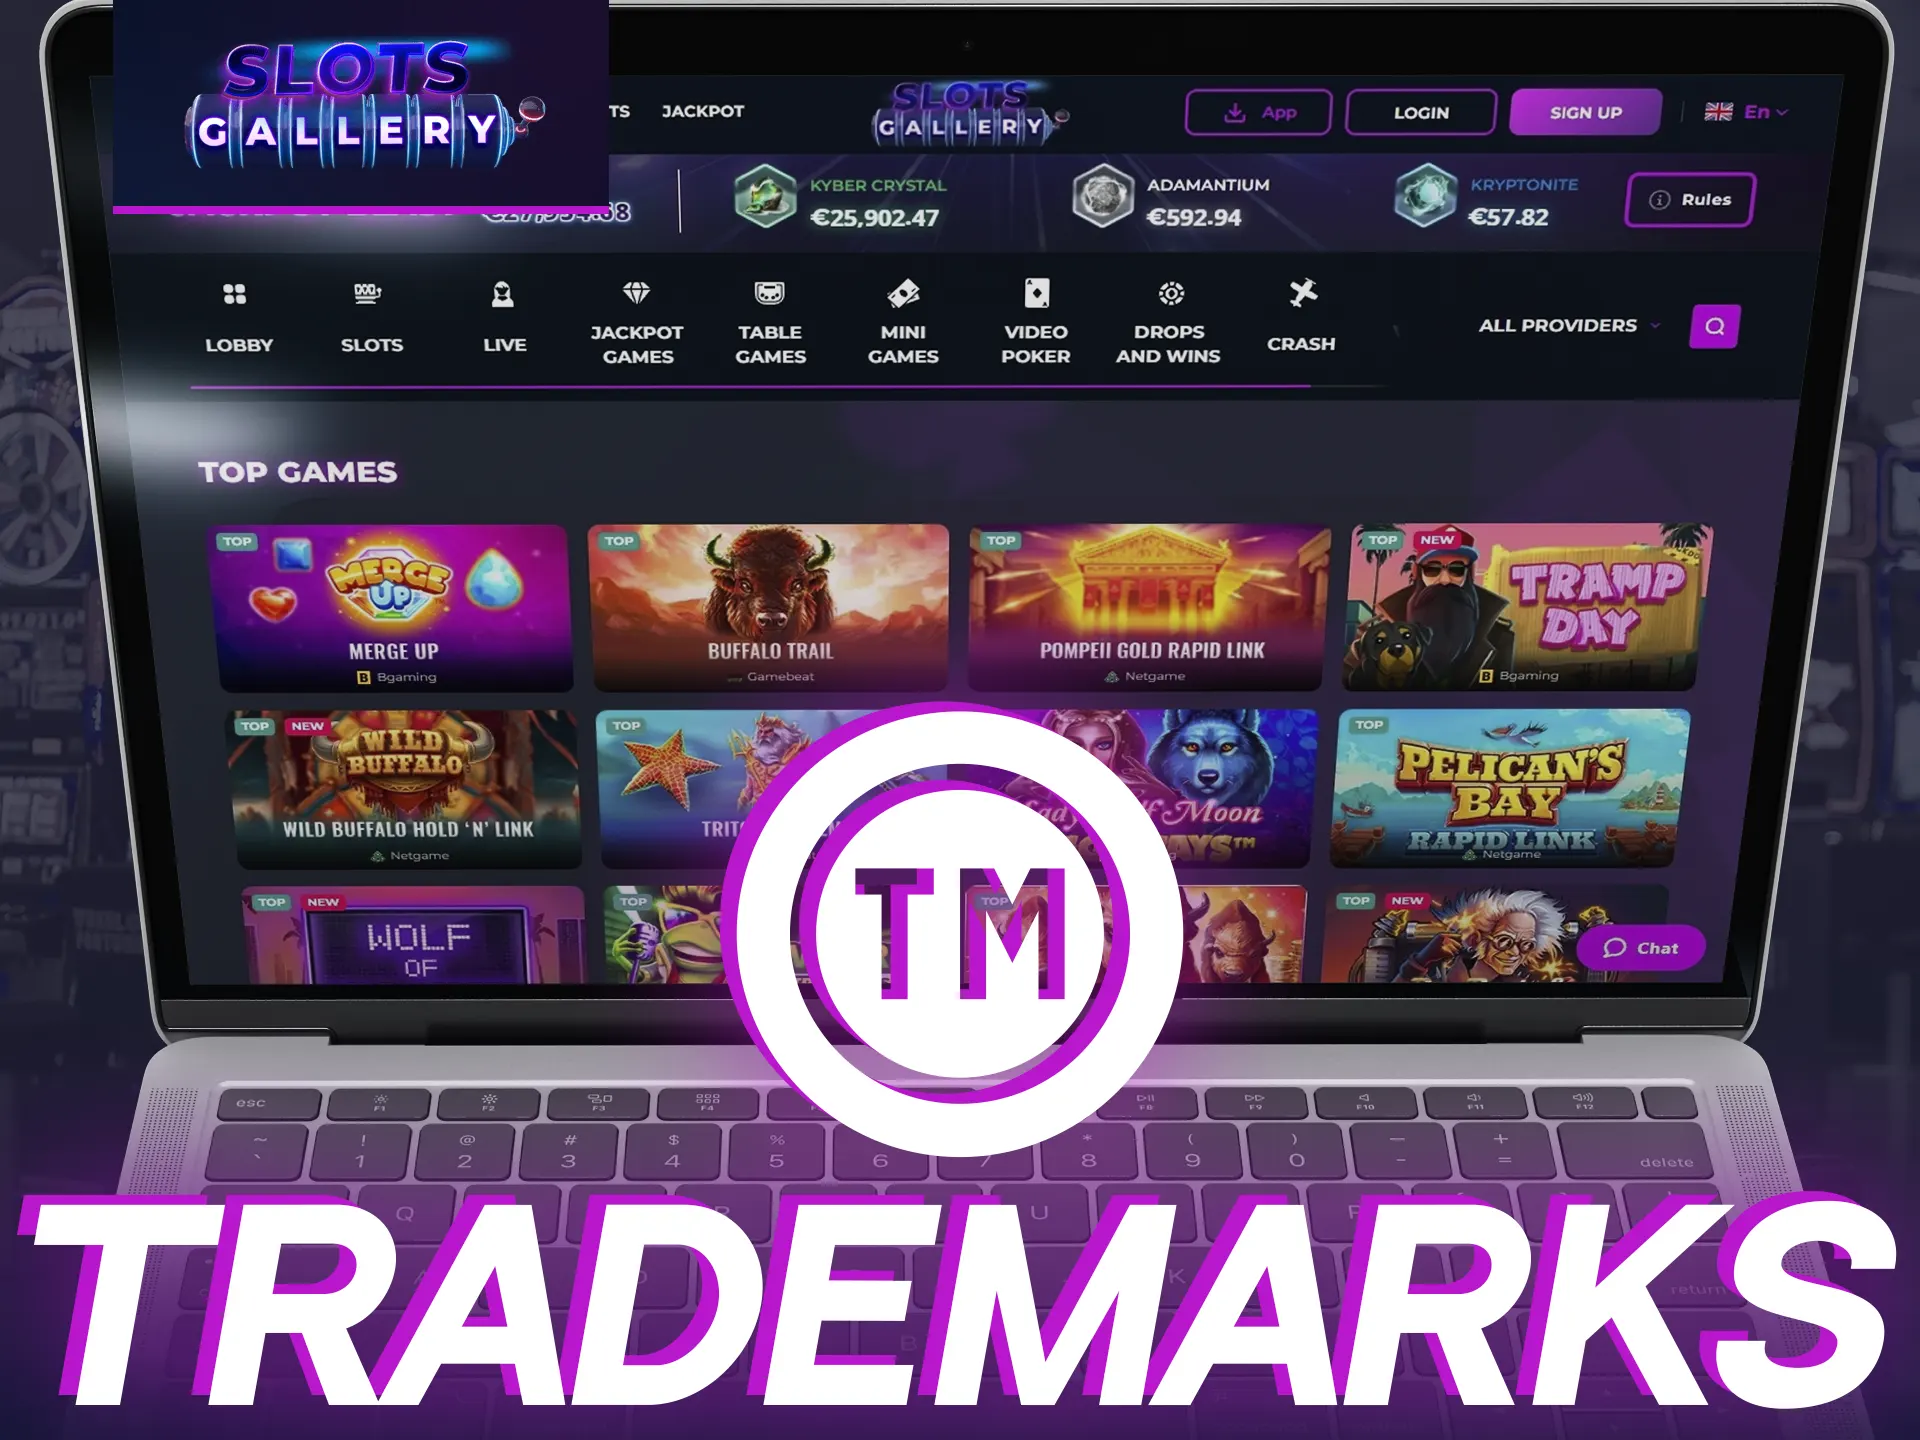 The logos and trademarks on Slots Gallery are copyrighted.